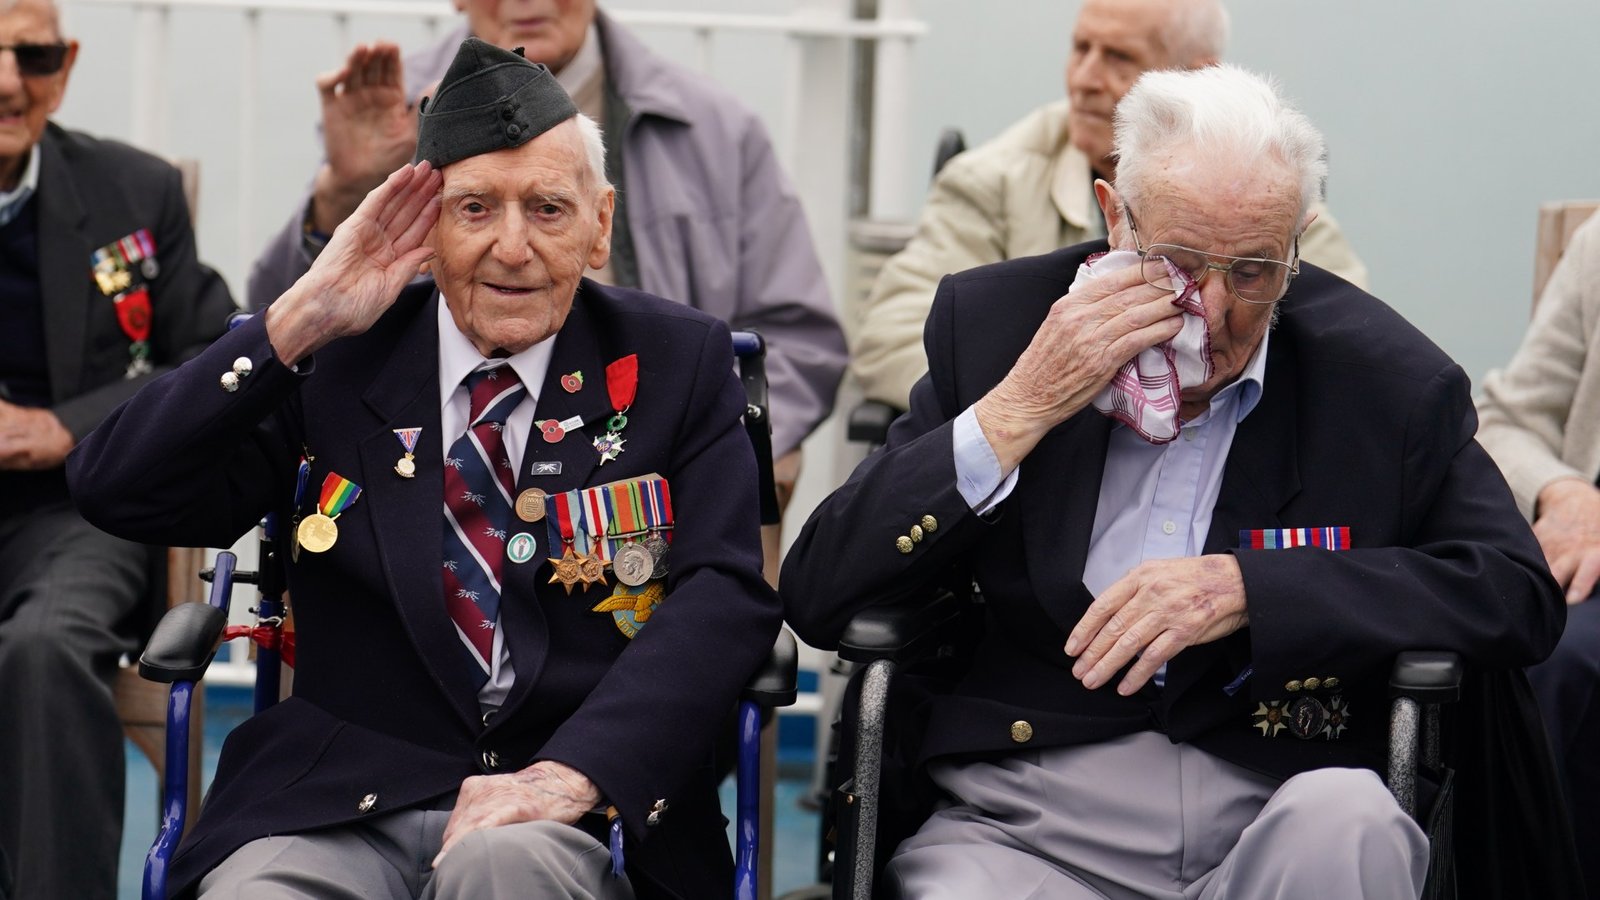 D-Day veterans brim with pride and emotion as they head back to the scene of their finest hour